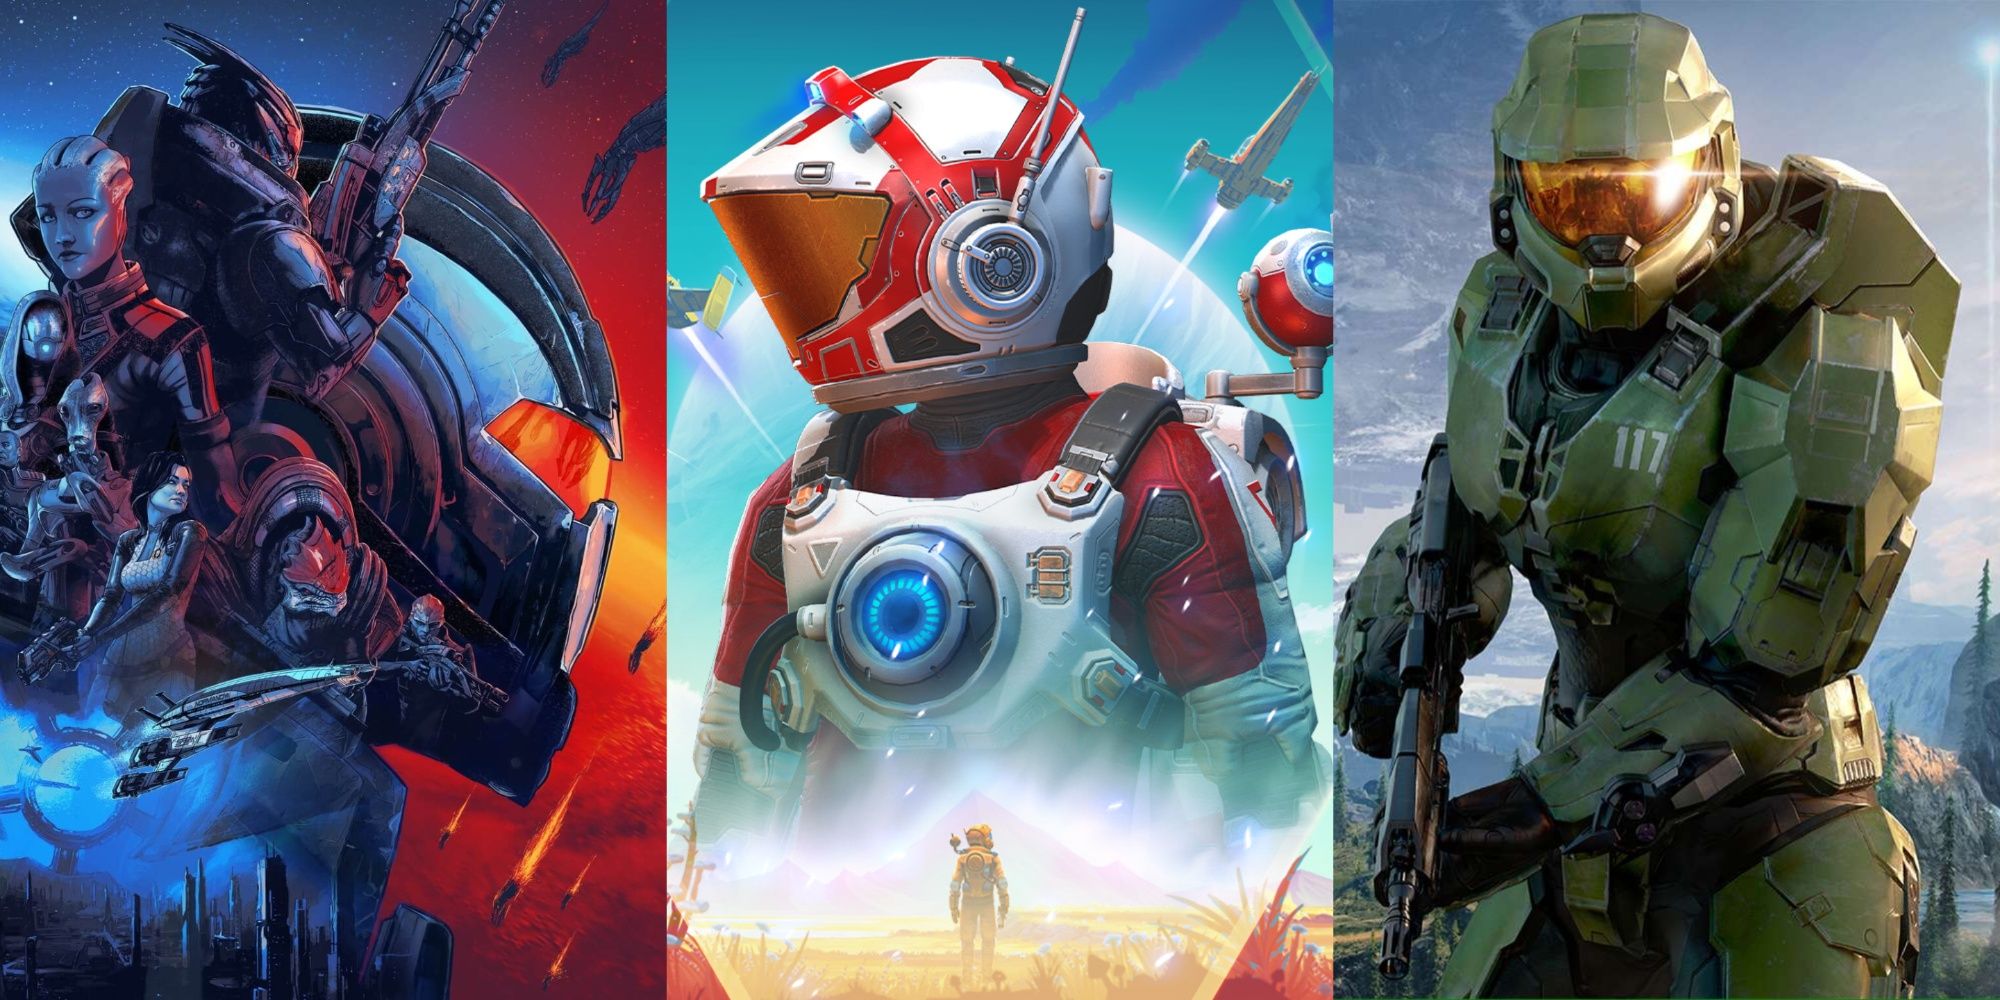 Posters for Mass Effect Legendary Edition, No Man's Sky, and Halo Infinite